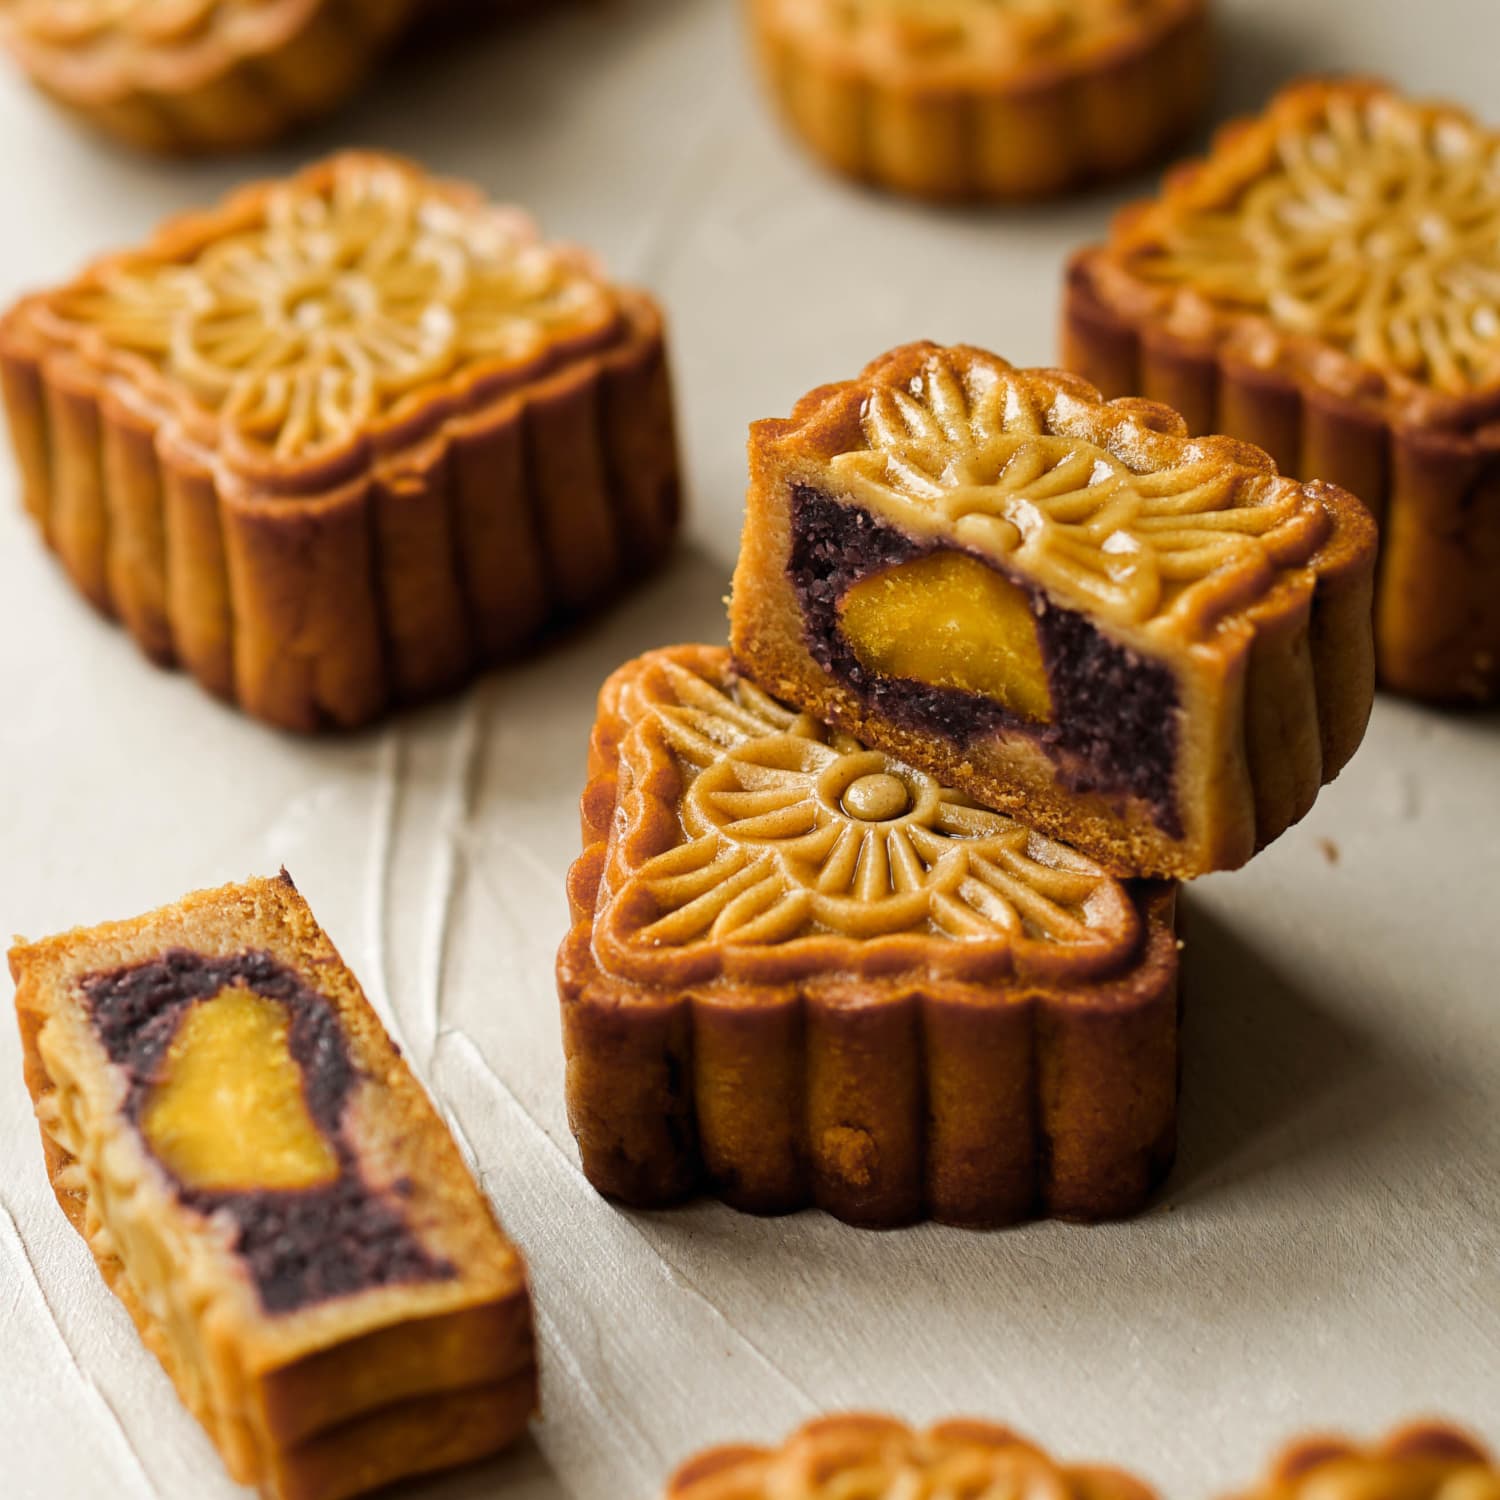 Mid-Autumn Festival 2021: this year's top pick of creative mooncakes -  Retail in Asia